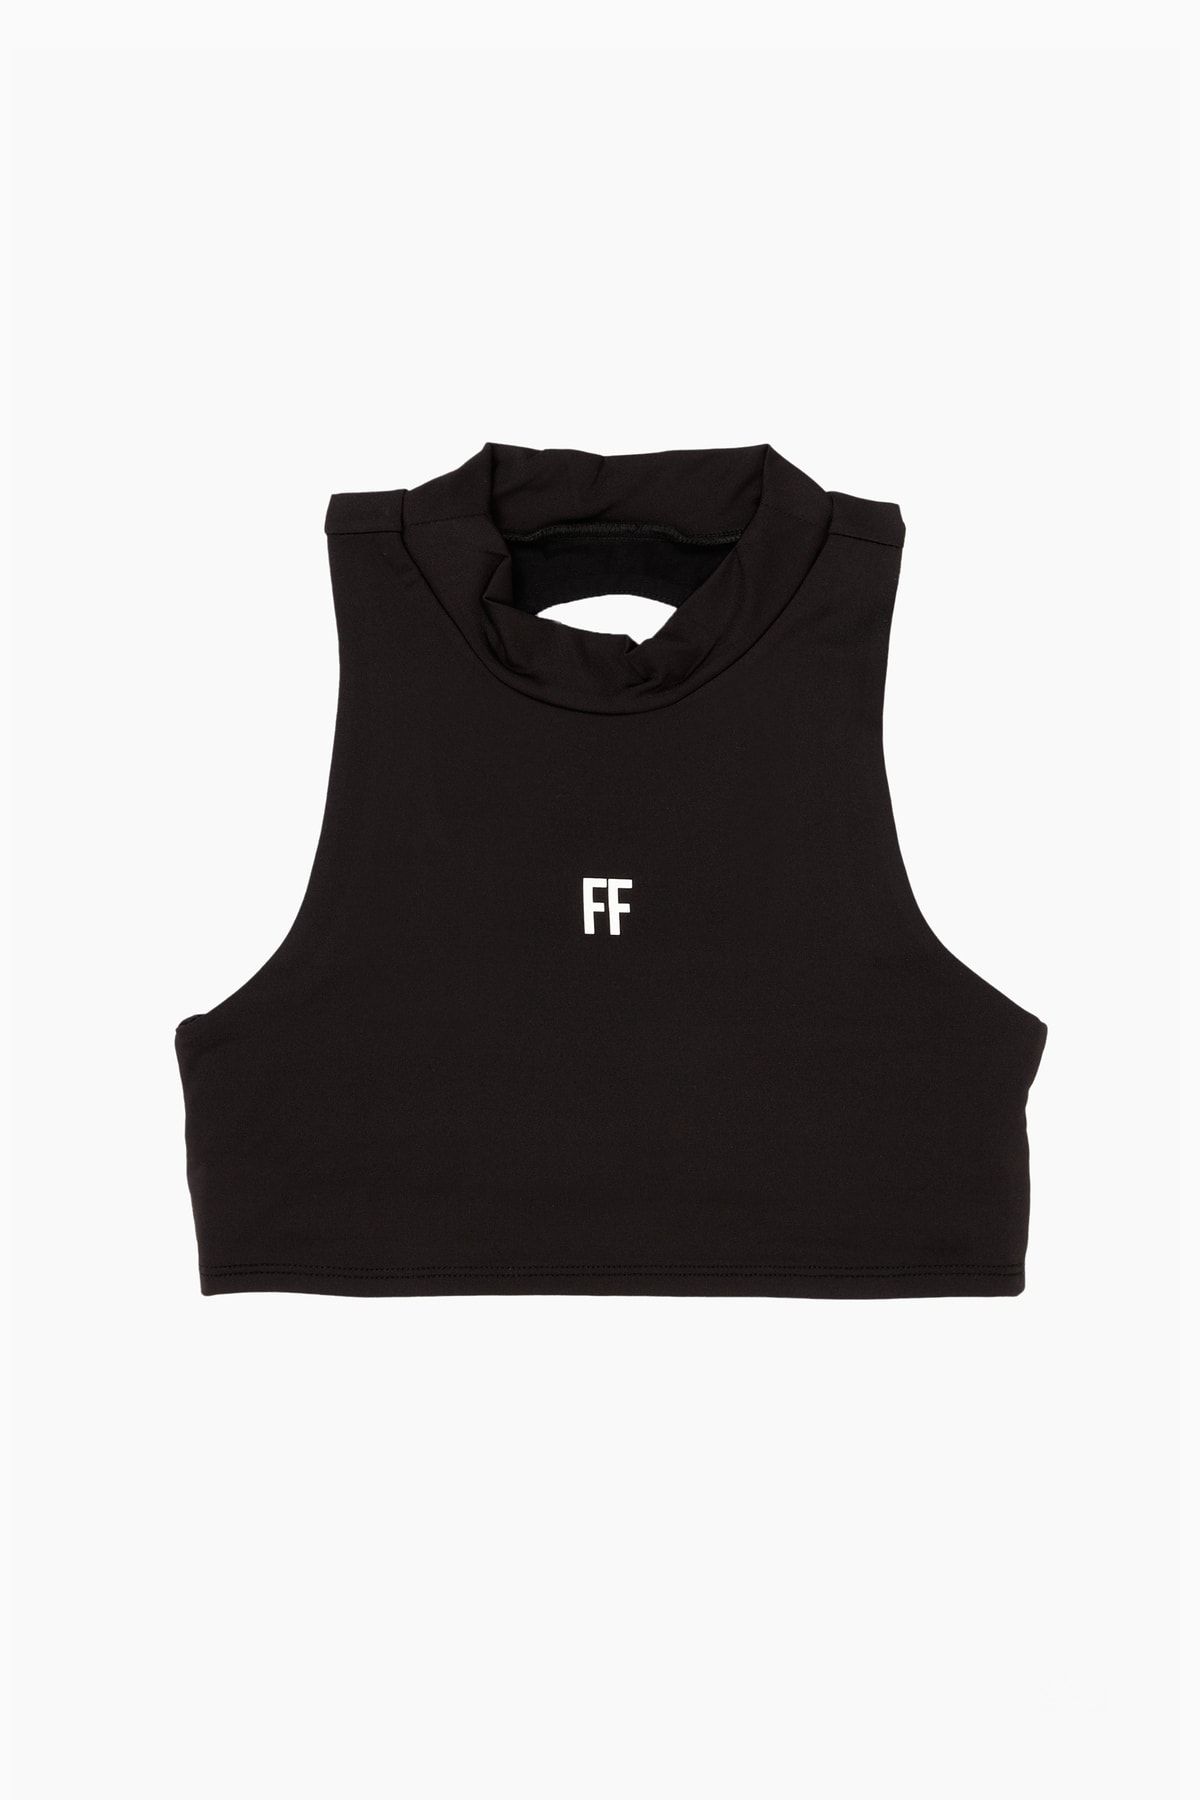 For Fun FF / Airlift Tank Top